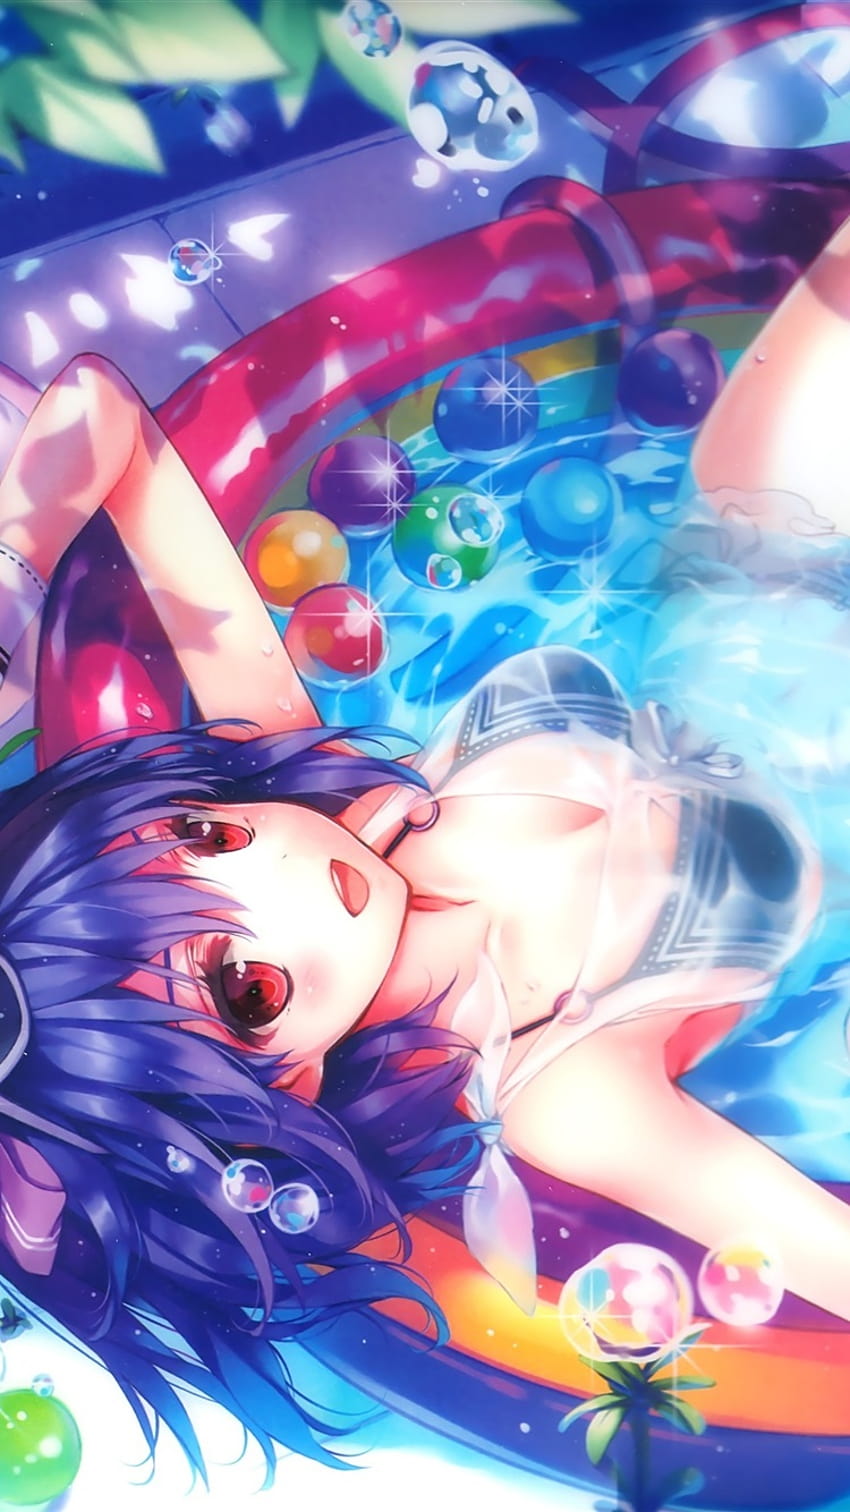 Happy anime girl, water, pool, bubbles, sunglasses 1080x1920 iPhone 8/7/6/6S Plus , background HD phone wallpaper